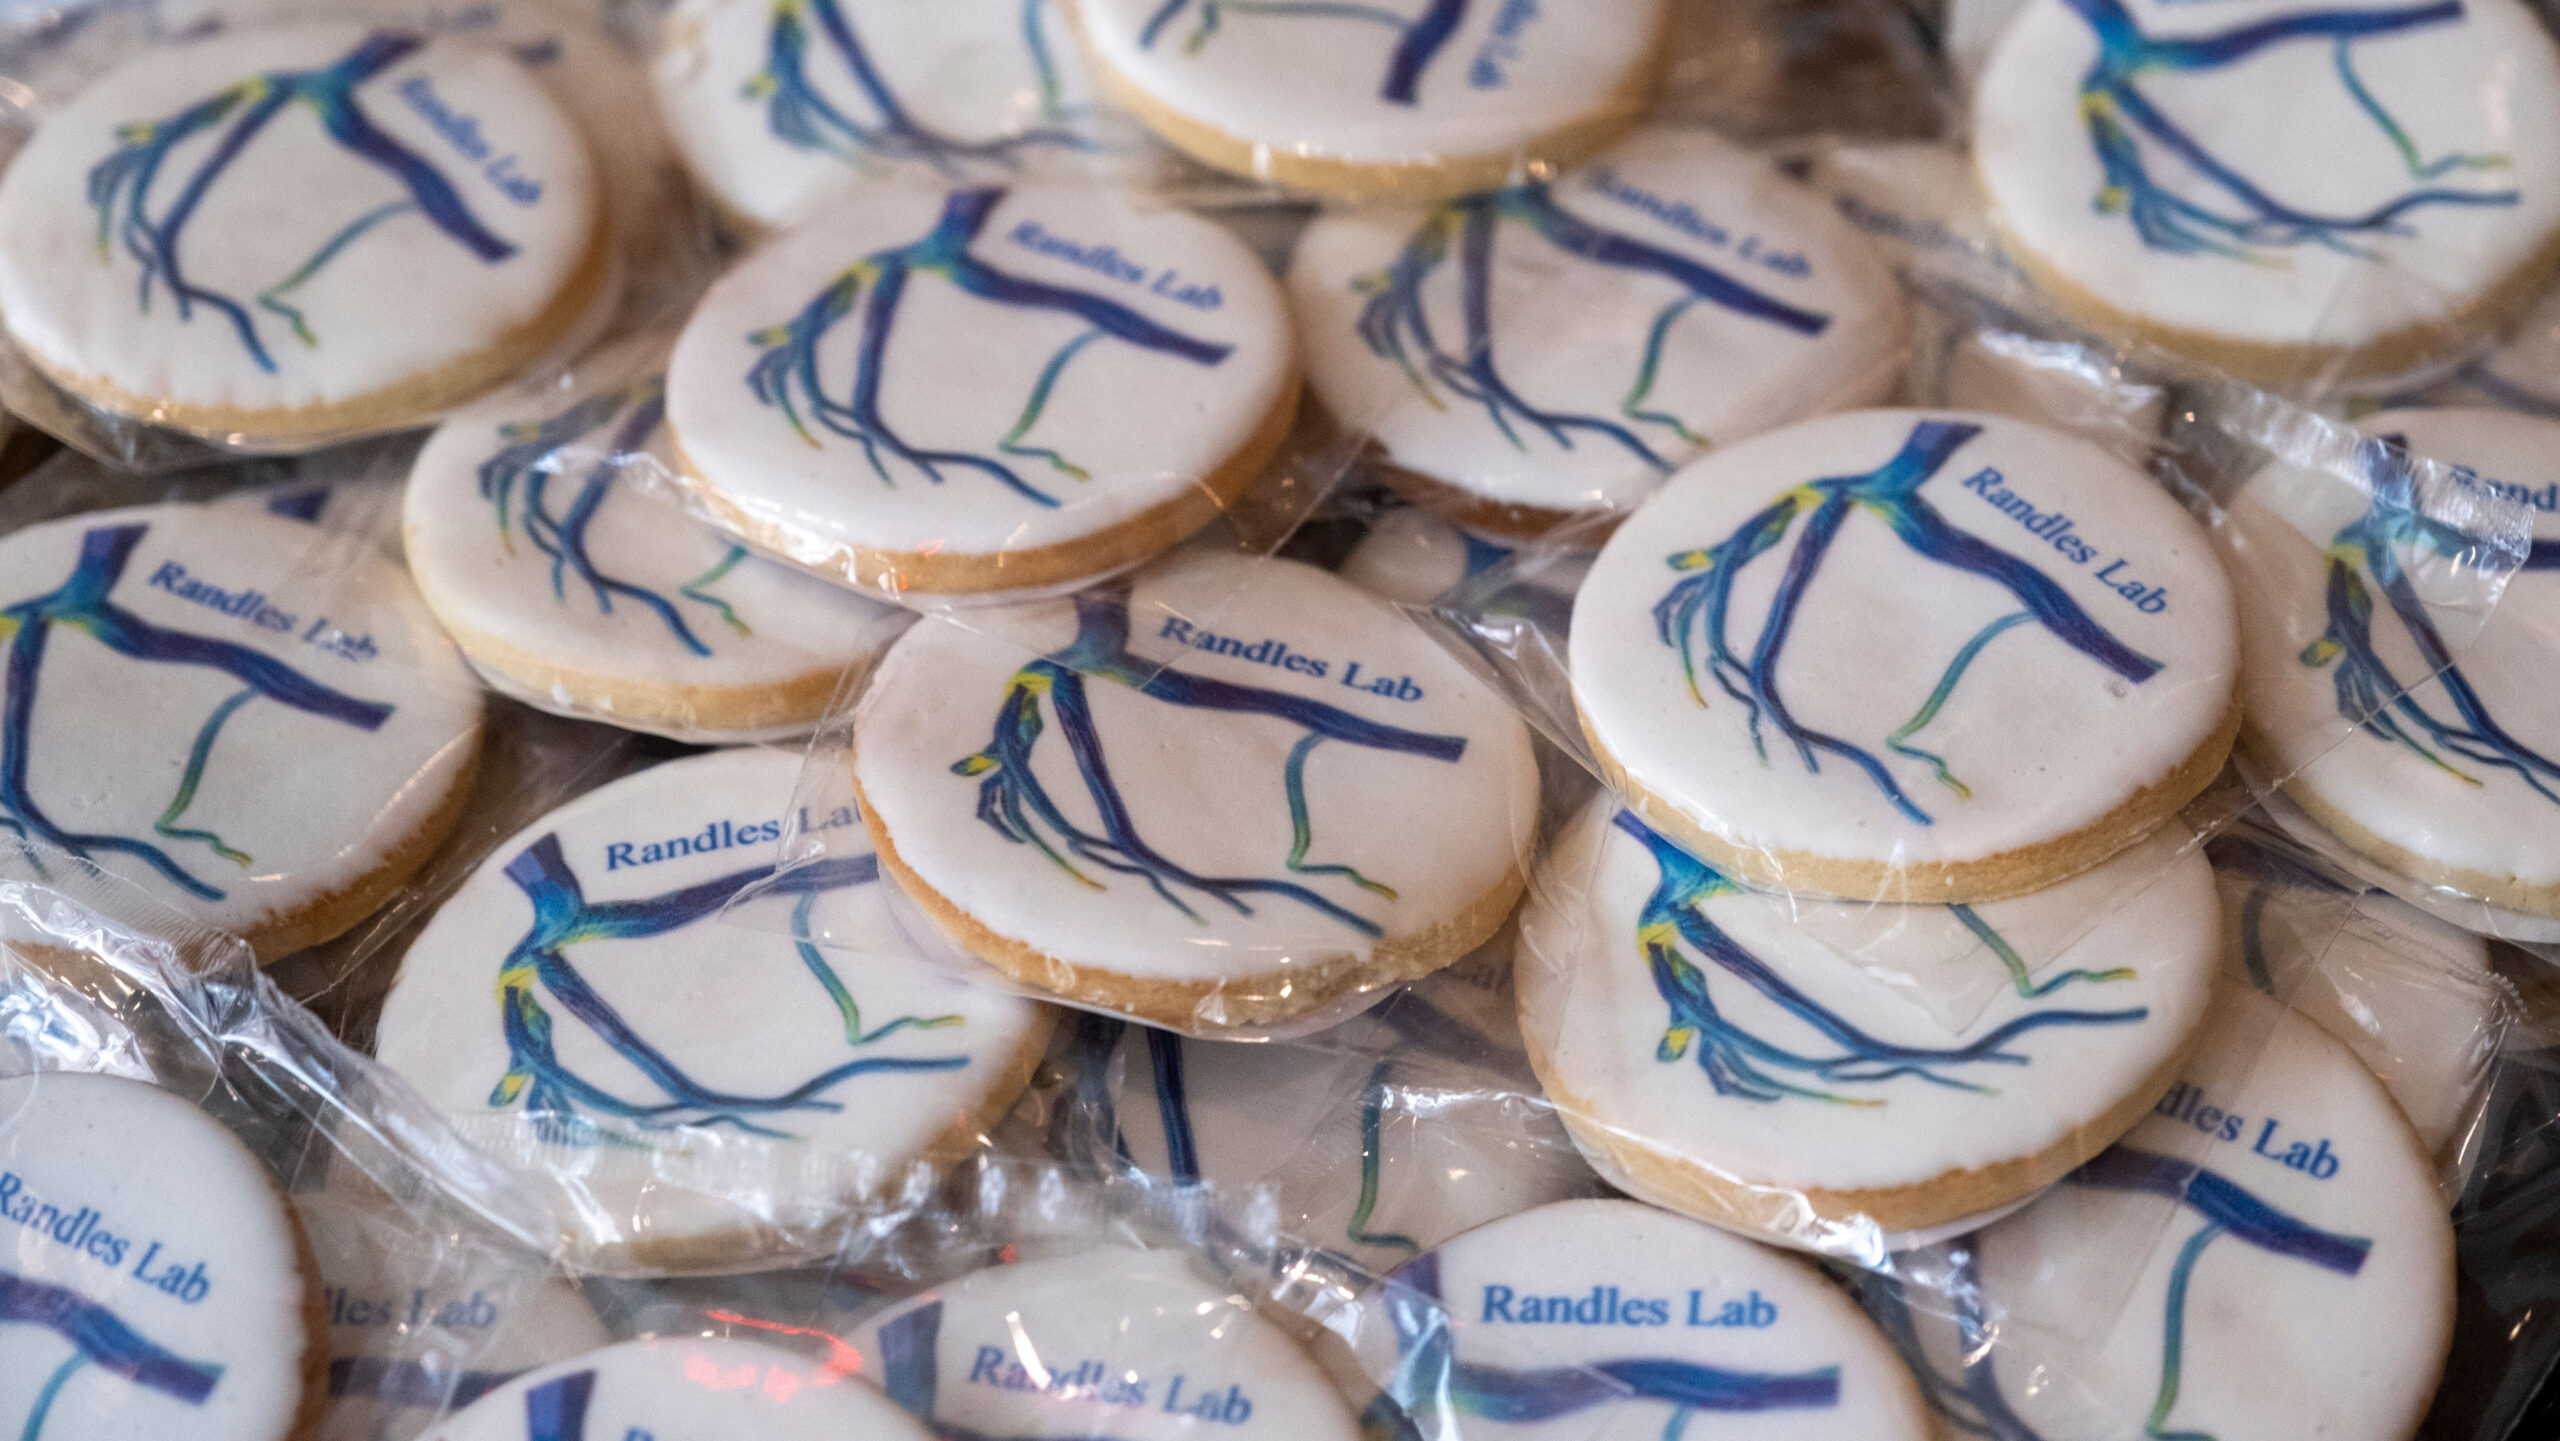 Cookies from different labs were available at the BME reception